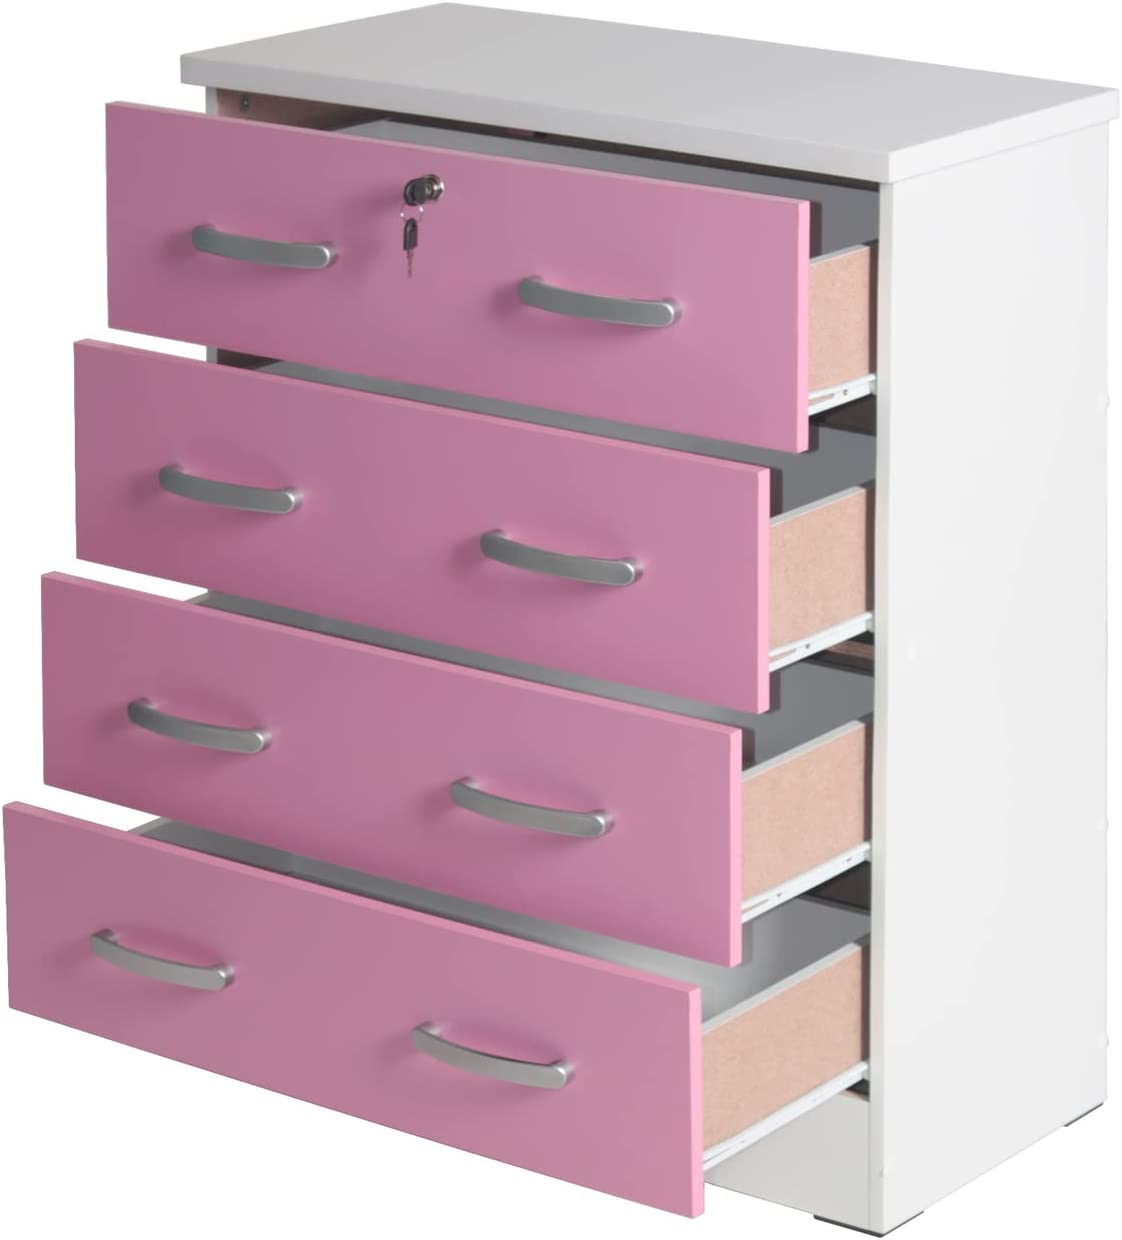 Better Home Products Cindy 4 Drawer Chest Wooden Dresser with Lock White and Pink